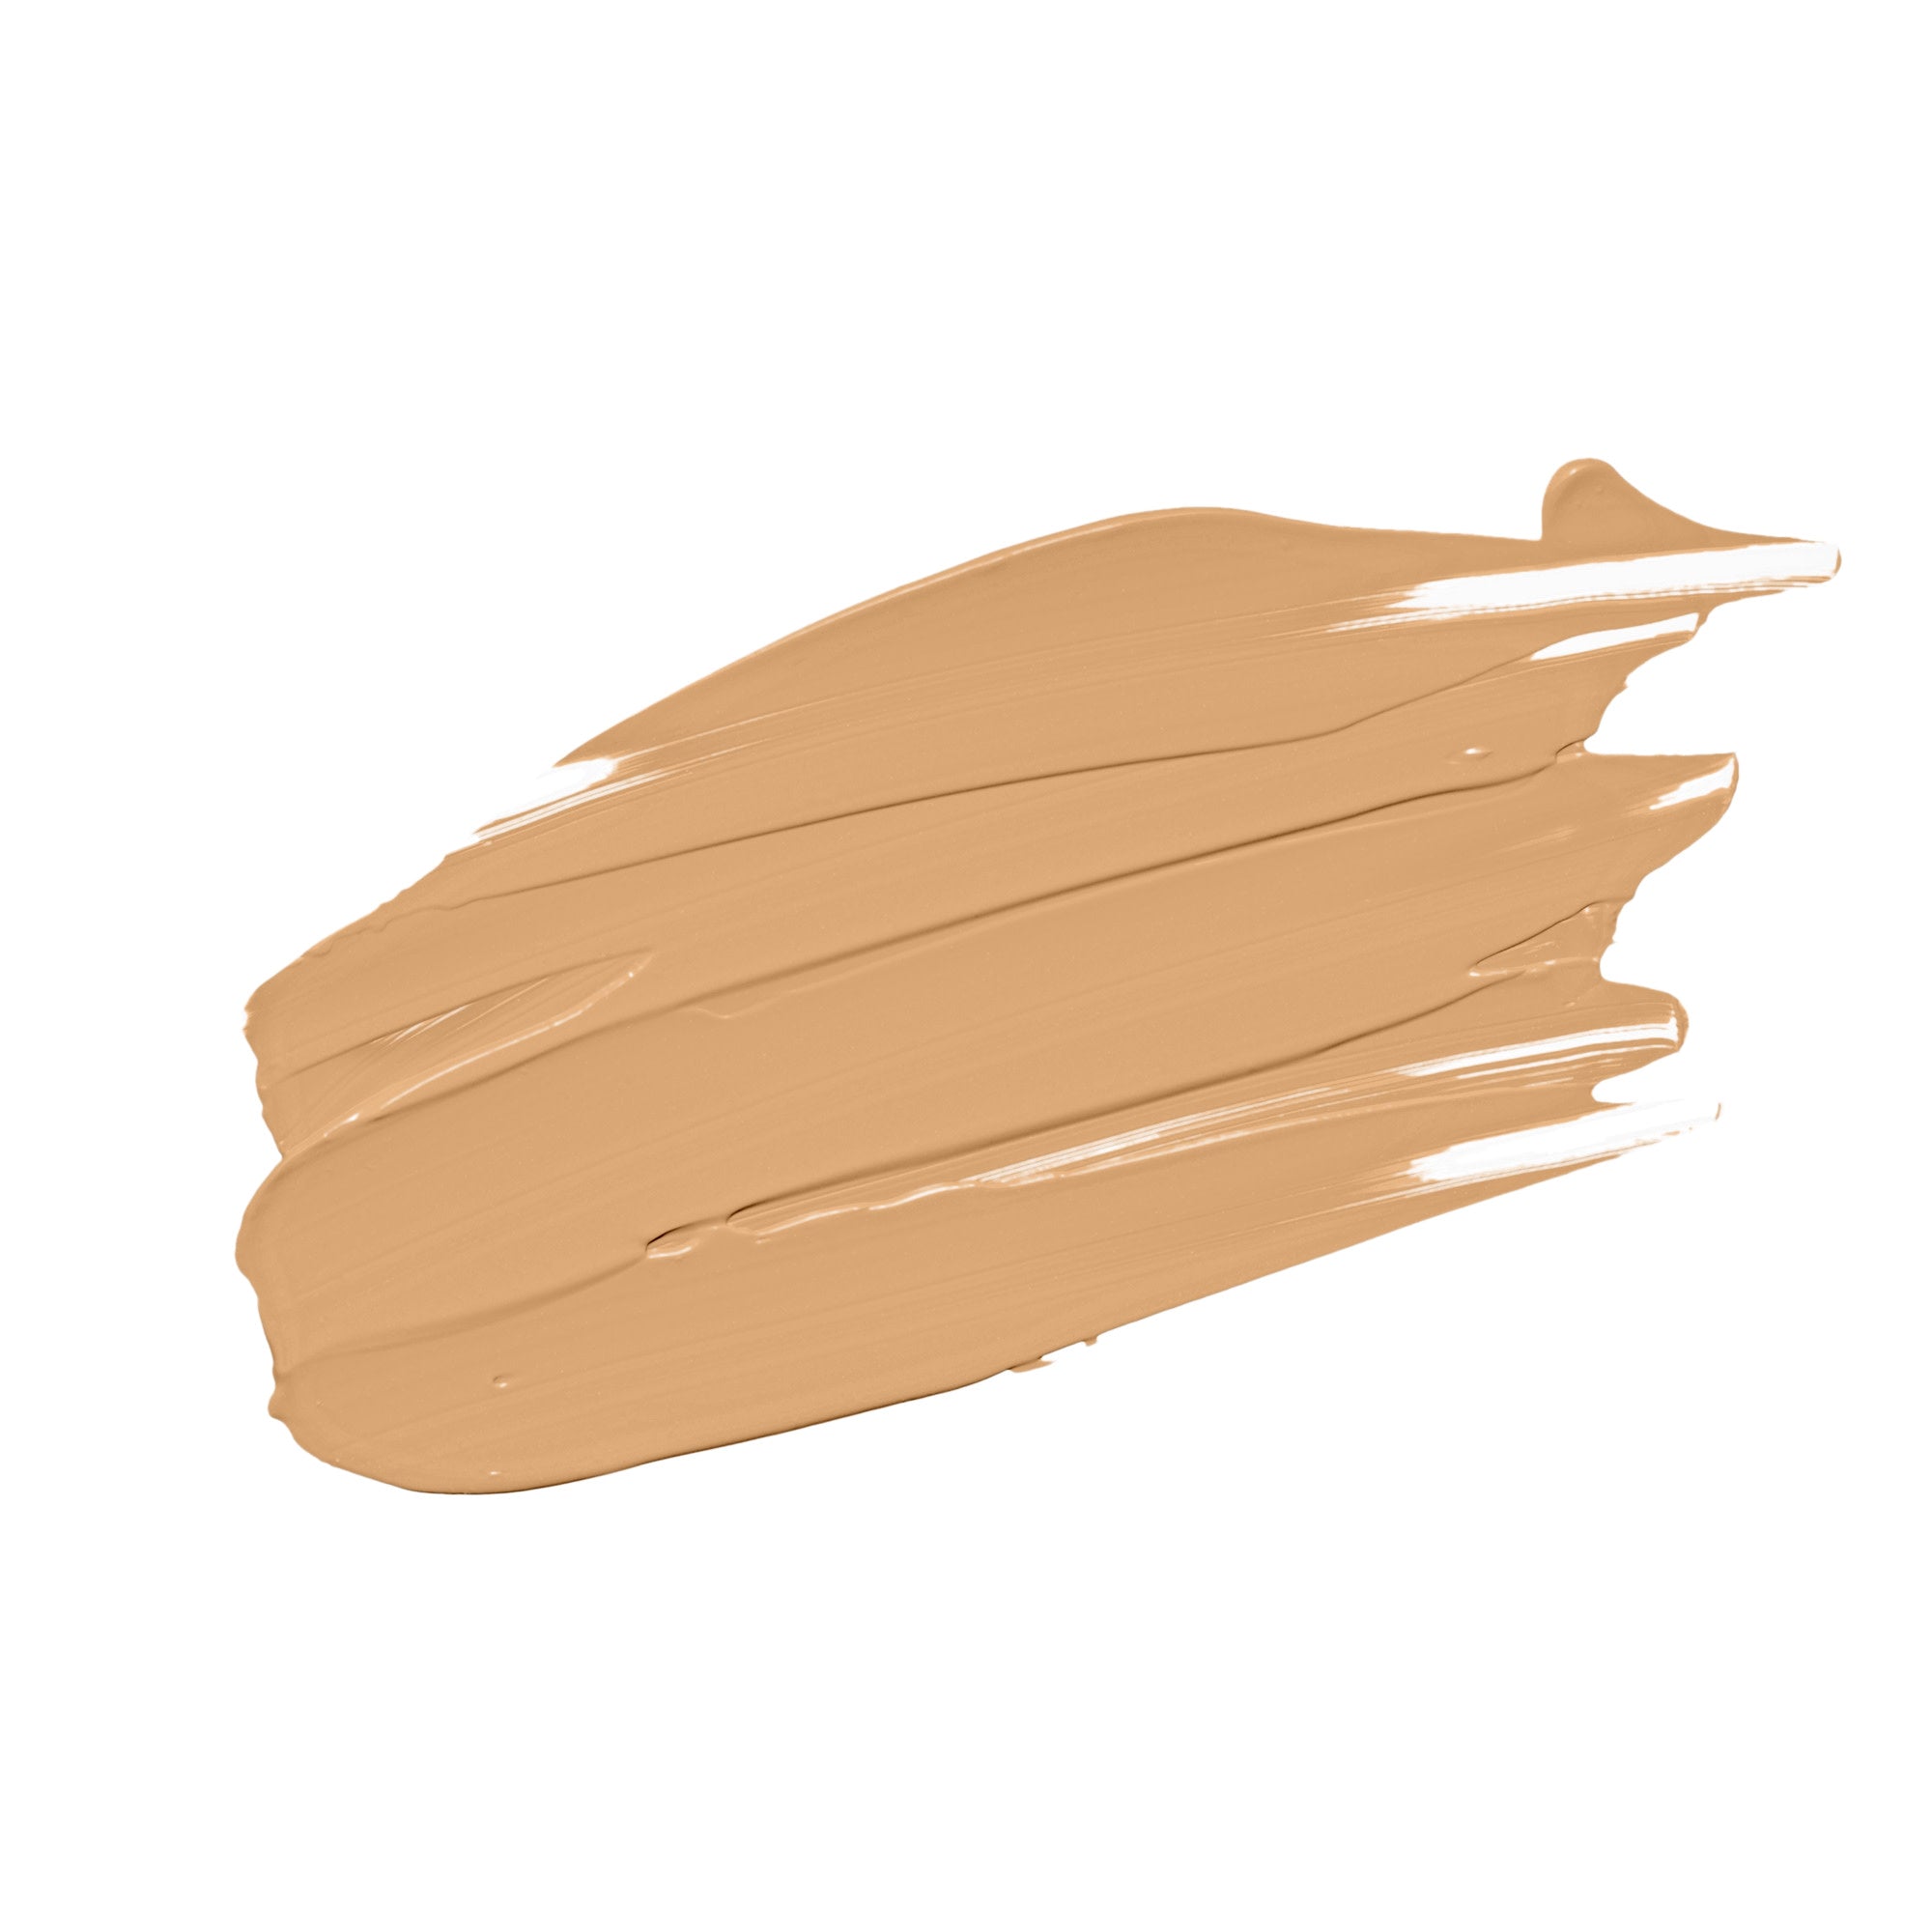 Anacotte's Cool-tone Concealers